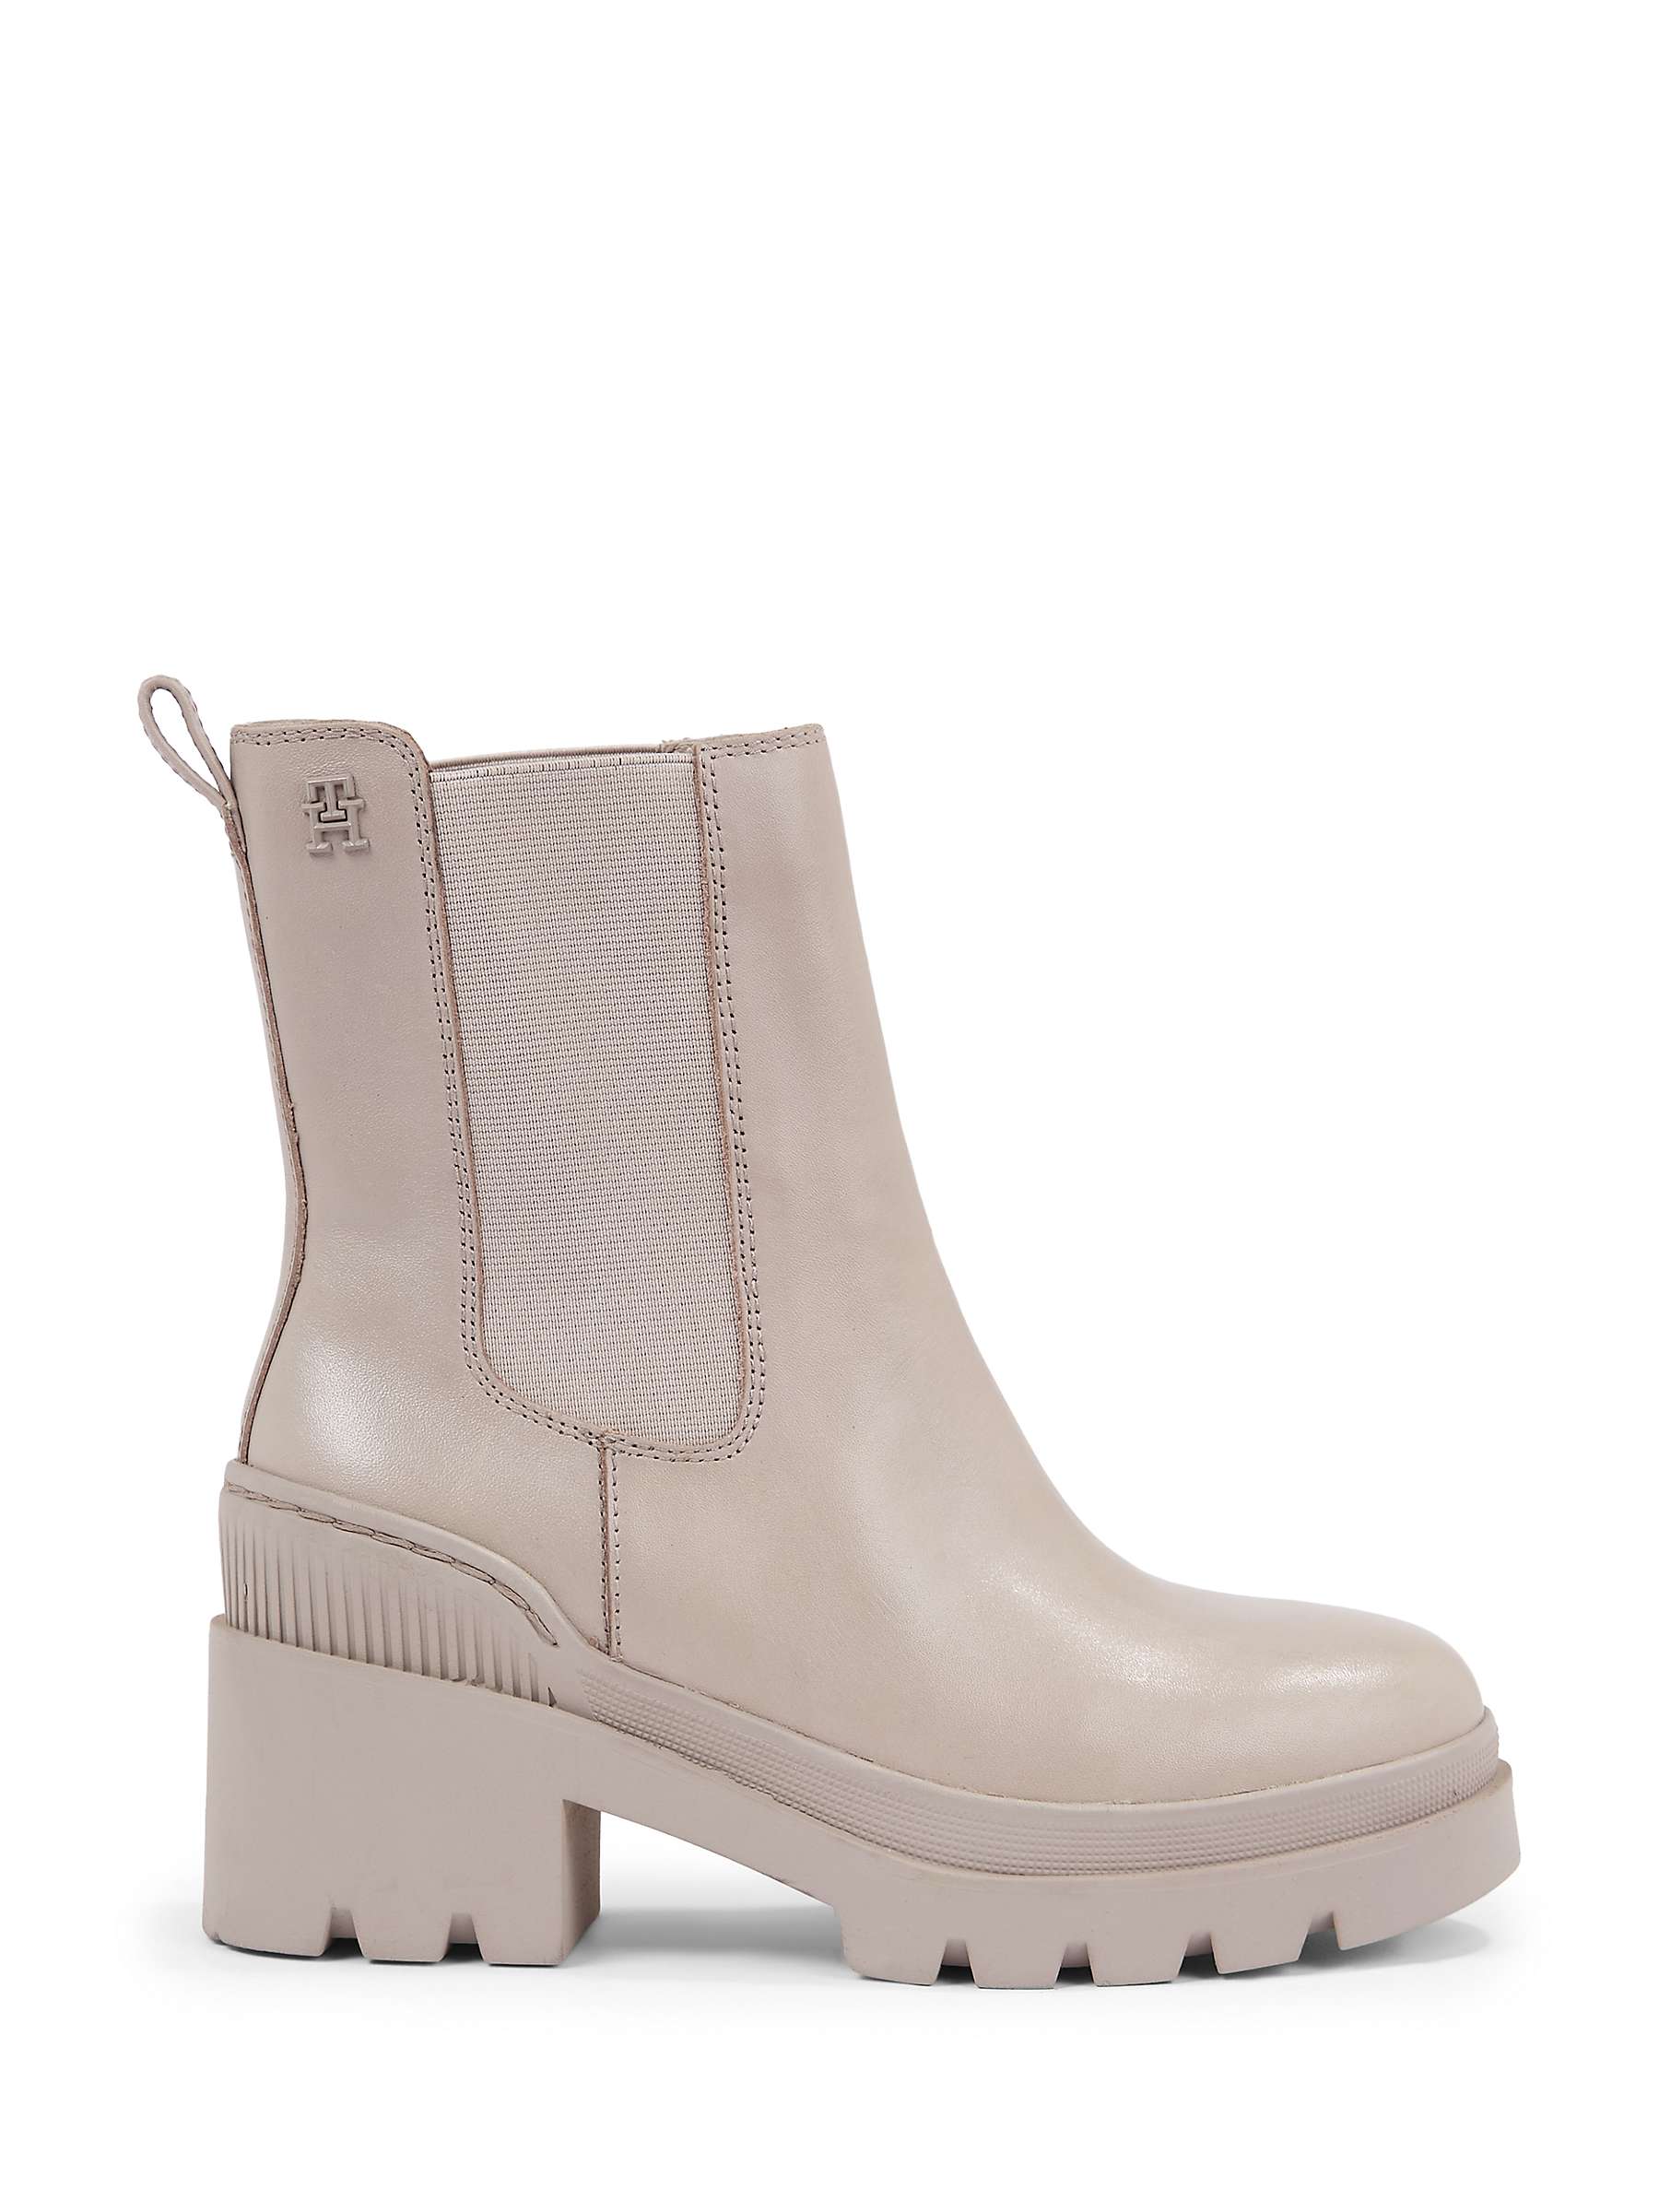 Buy Tommy Hilfiger Block Heel Leather Chelsea Boots, Smooth Taupe Online at johnlewis.com